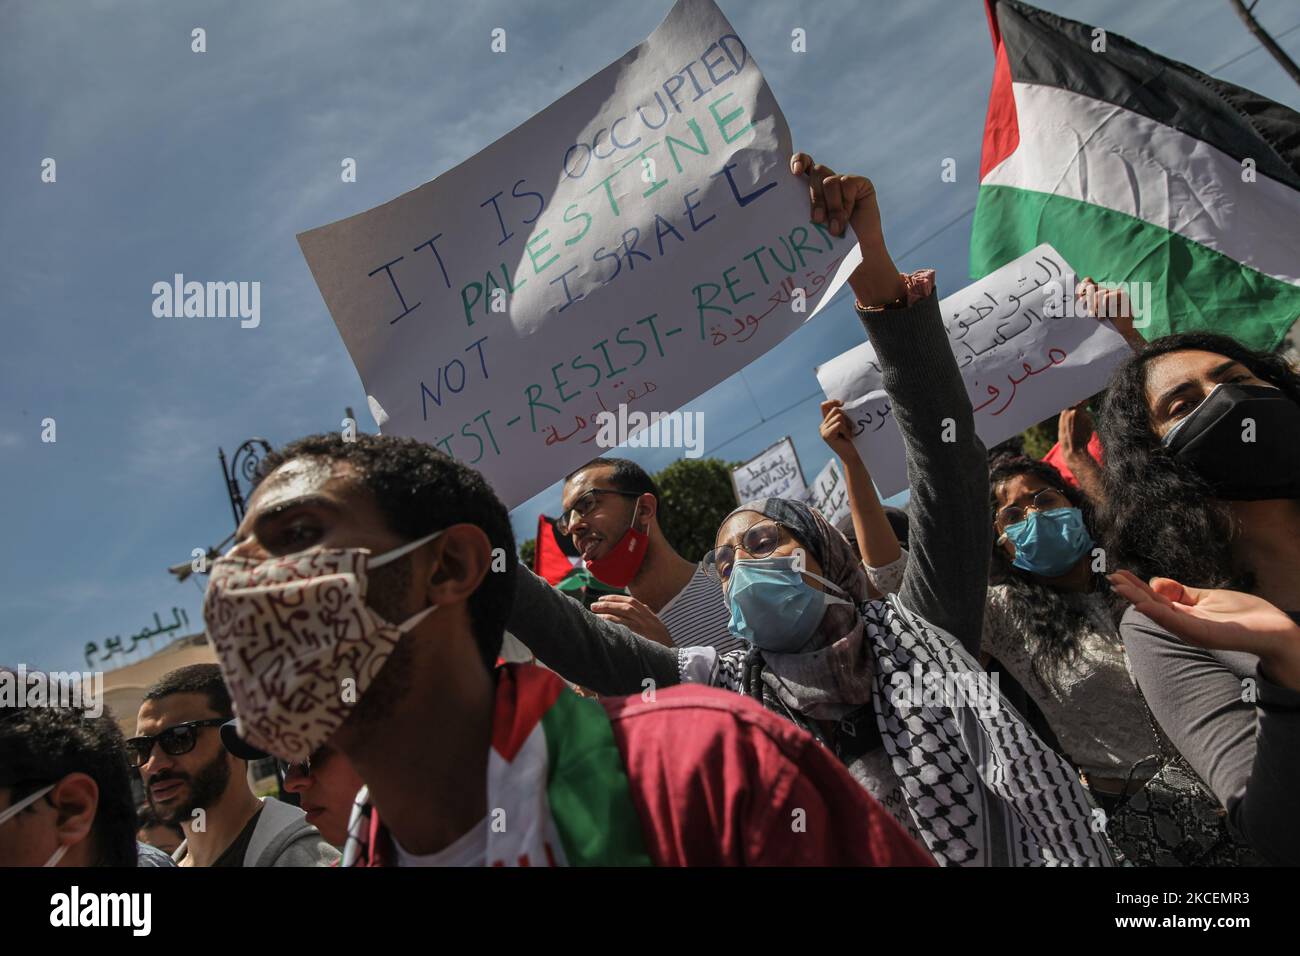 A female protester lifts a placard that reads in english, it is called Occupied Palestine not Israel, Resist, Return, as other protesters wave the Palestinian flag during a demonstration held by thousands of Tunisian an Palestinian demonstrators on avenue Habib Bourguiba in the capital Tunis, Tunisia, on May 15, 2021, in support with the Palestinian people and to protest against the Israel's air strikes on Gaza strip and against the Israeli violations in the occupied territories in Palestine, especially in the Palestinian neighborhood in East Jerusalem, Sheikh Jarrah. (Photo by Chedly Ben Ibra Stock Photo